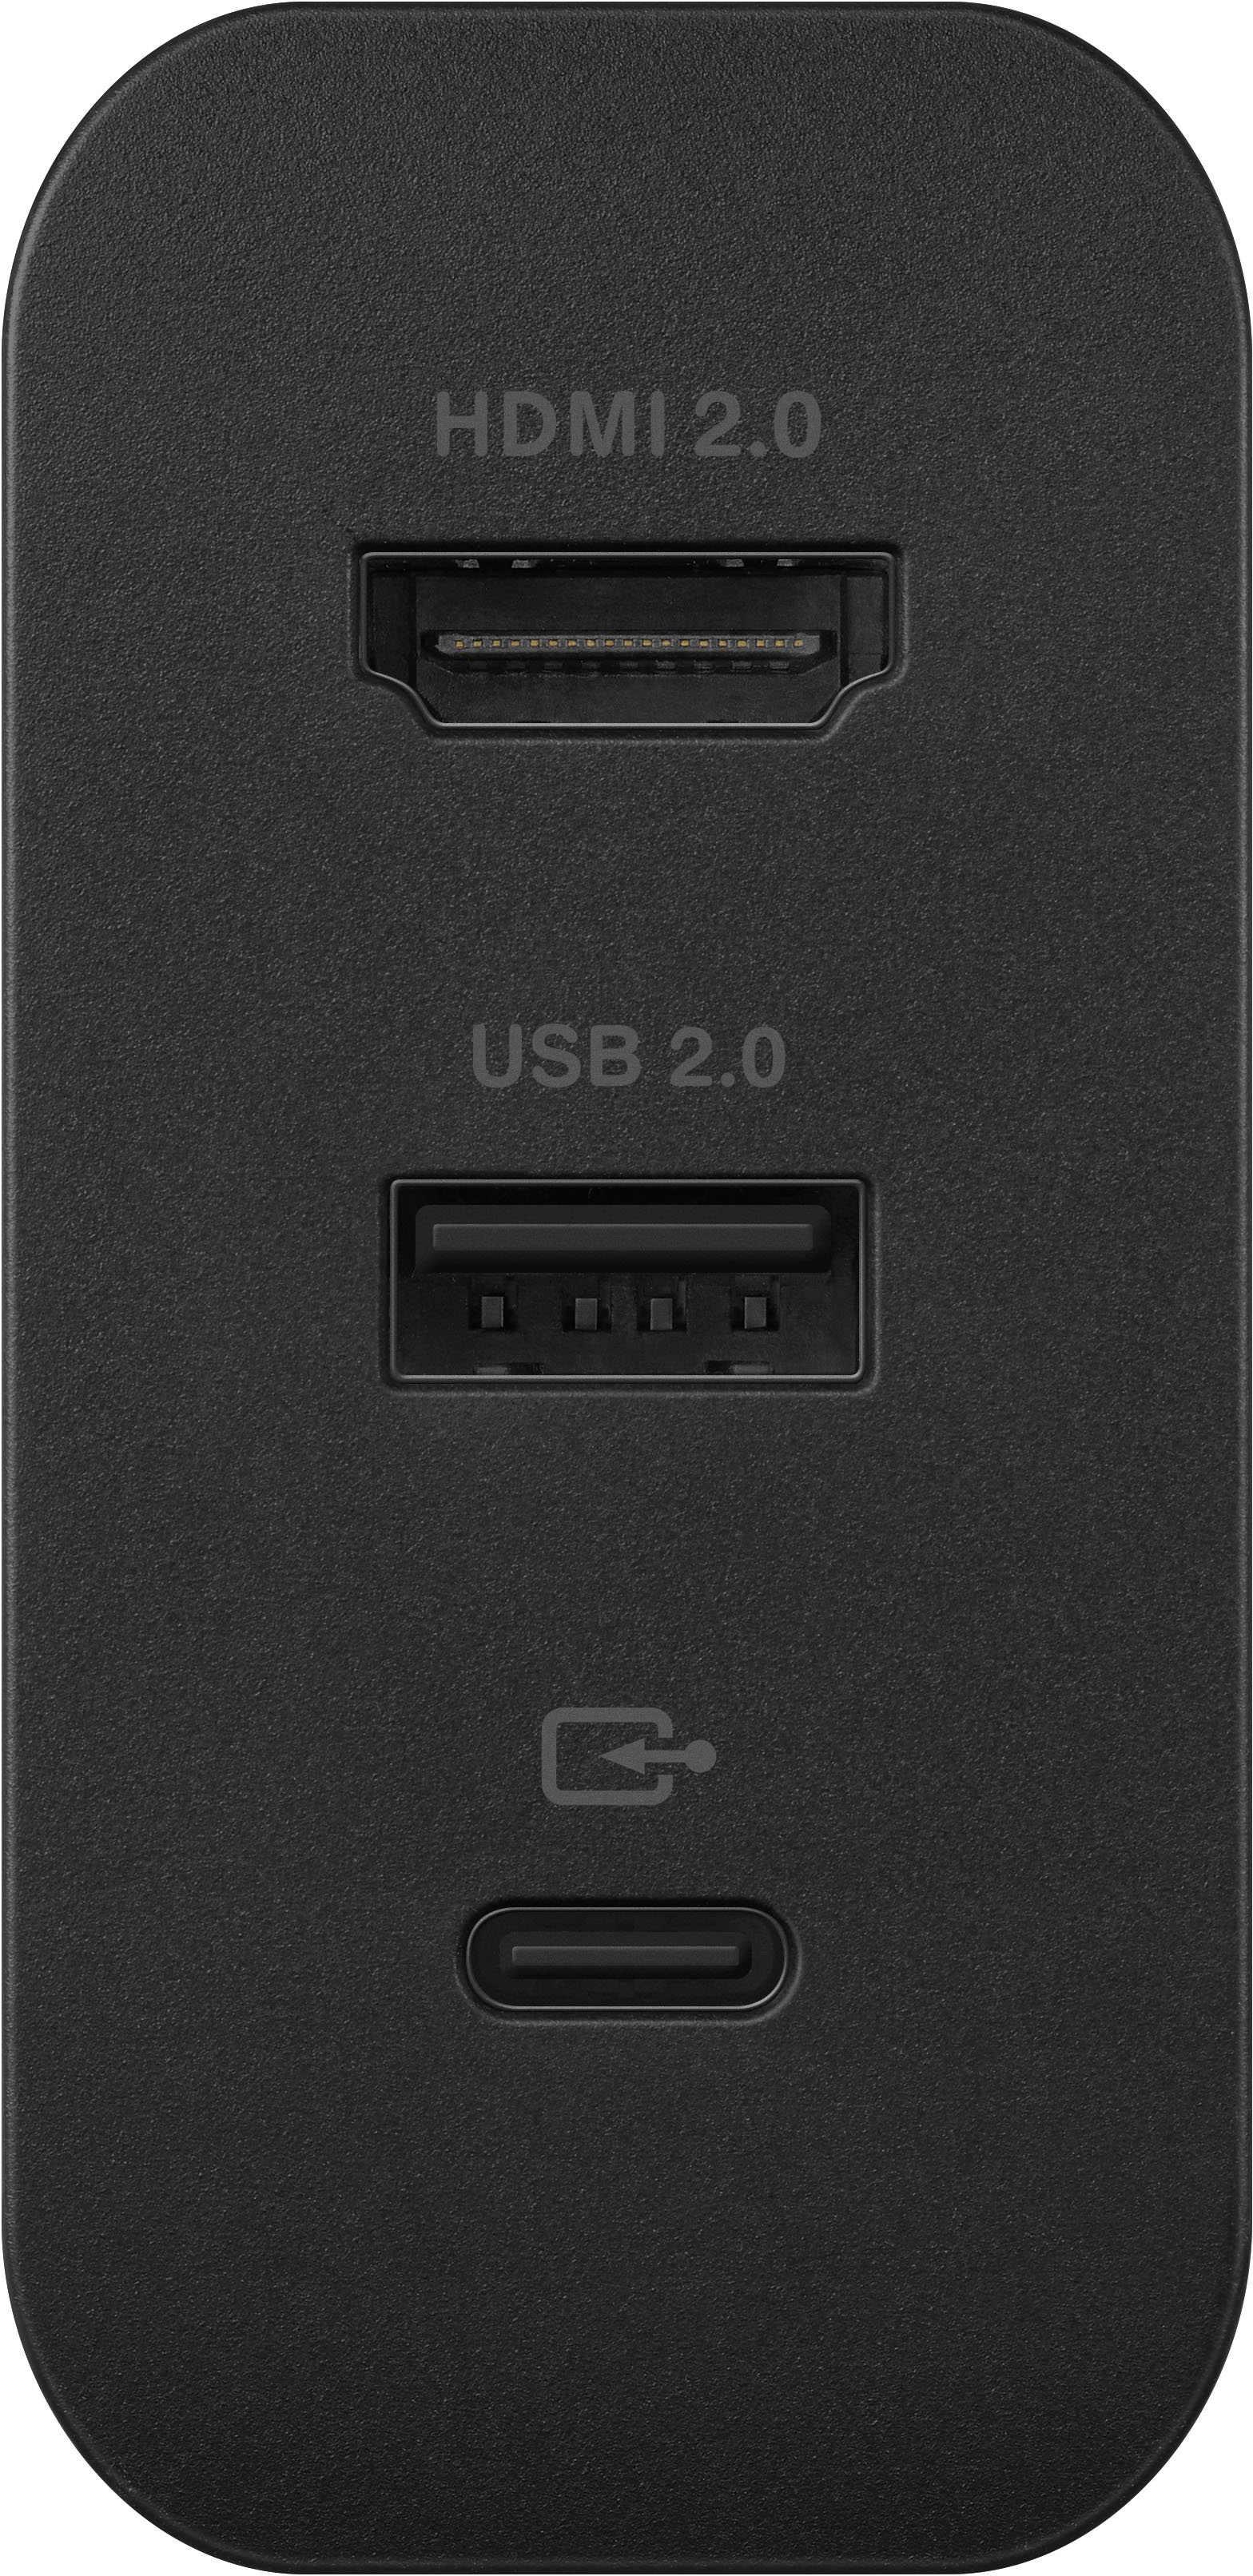 ASUS - ROG 65W Charger Dock - Supports HDMI 2.0 with USB Type-A and USB Type-C for ROG Ally - Black